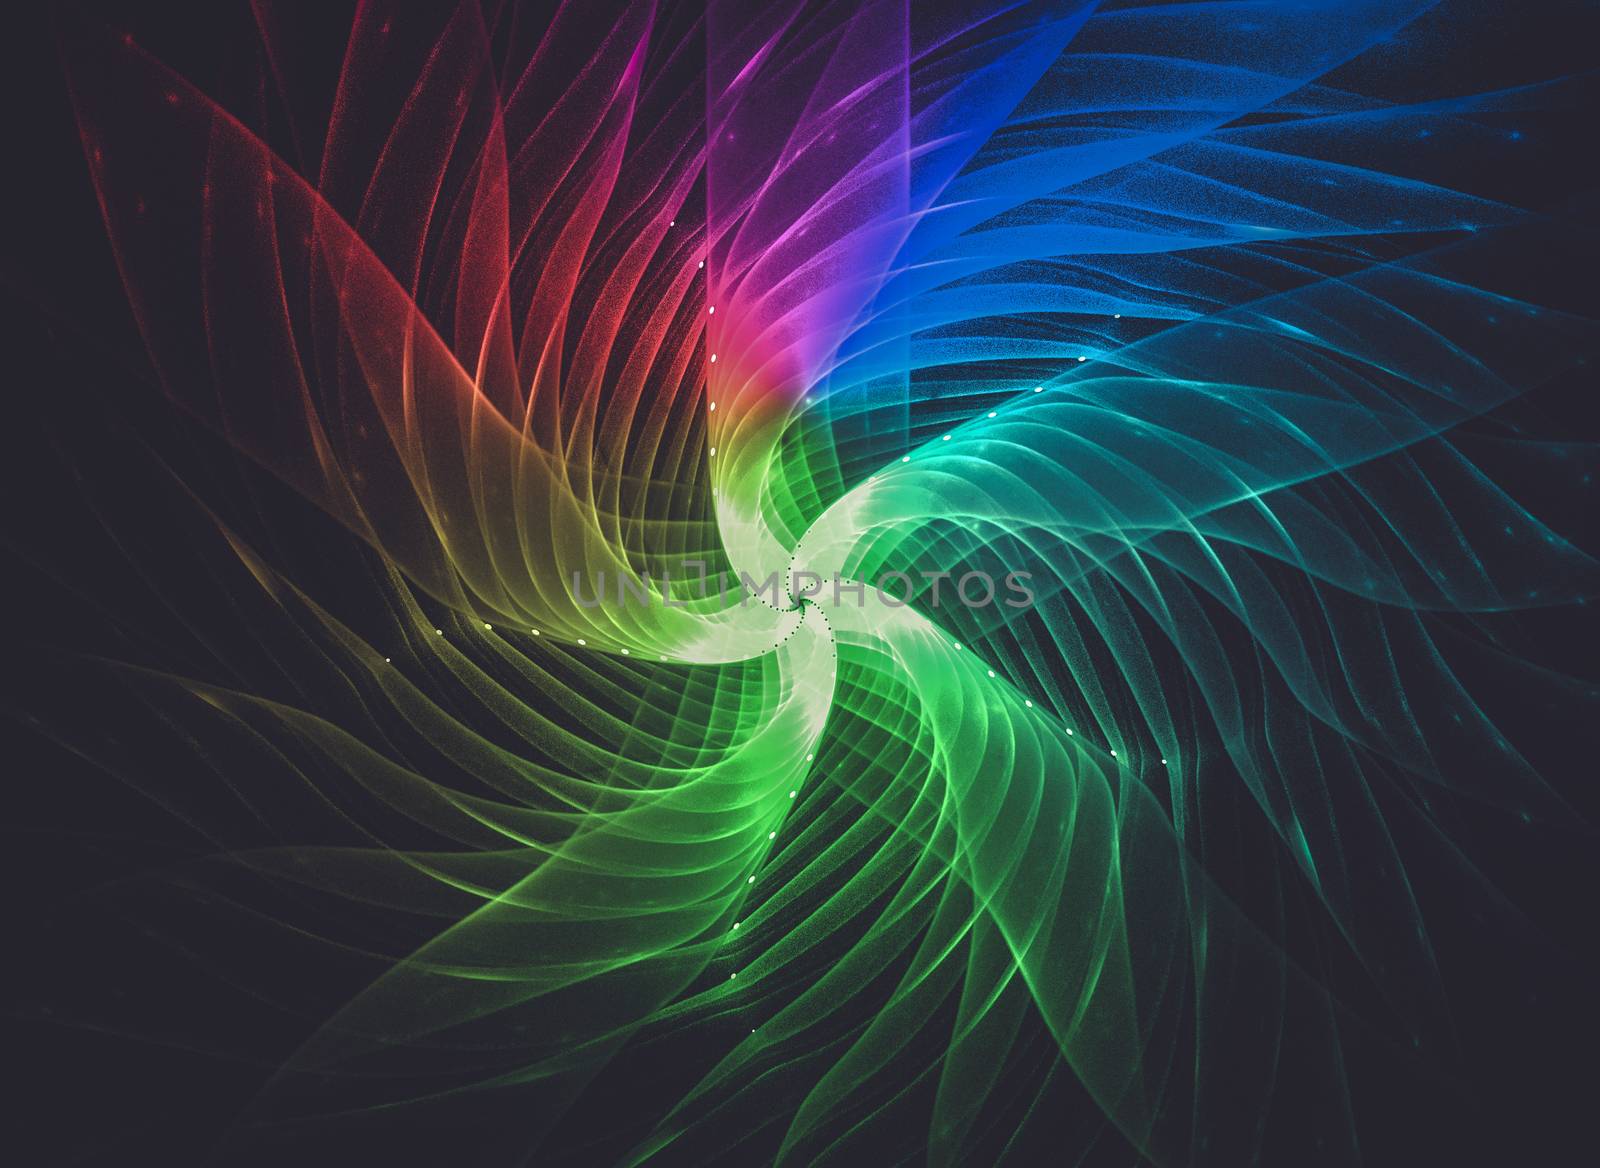 Star. Creative design background, fractal styles with color desi by FernandoCortes